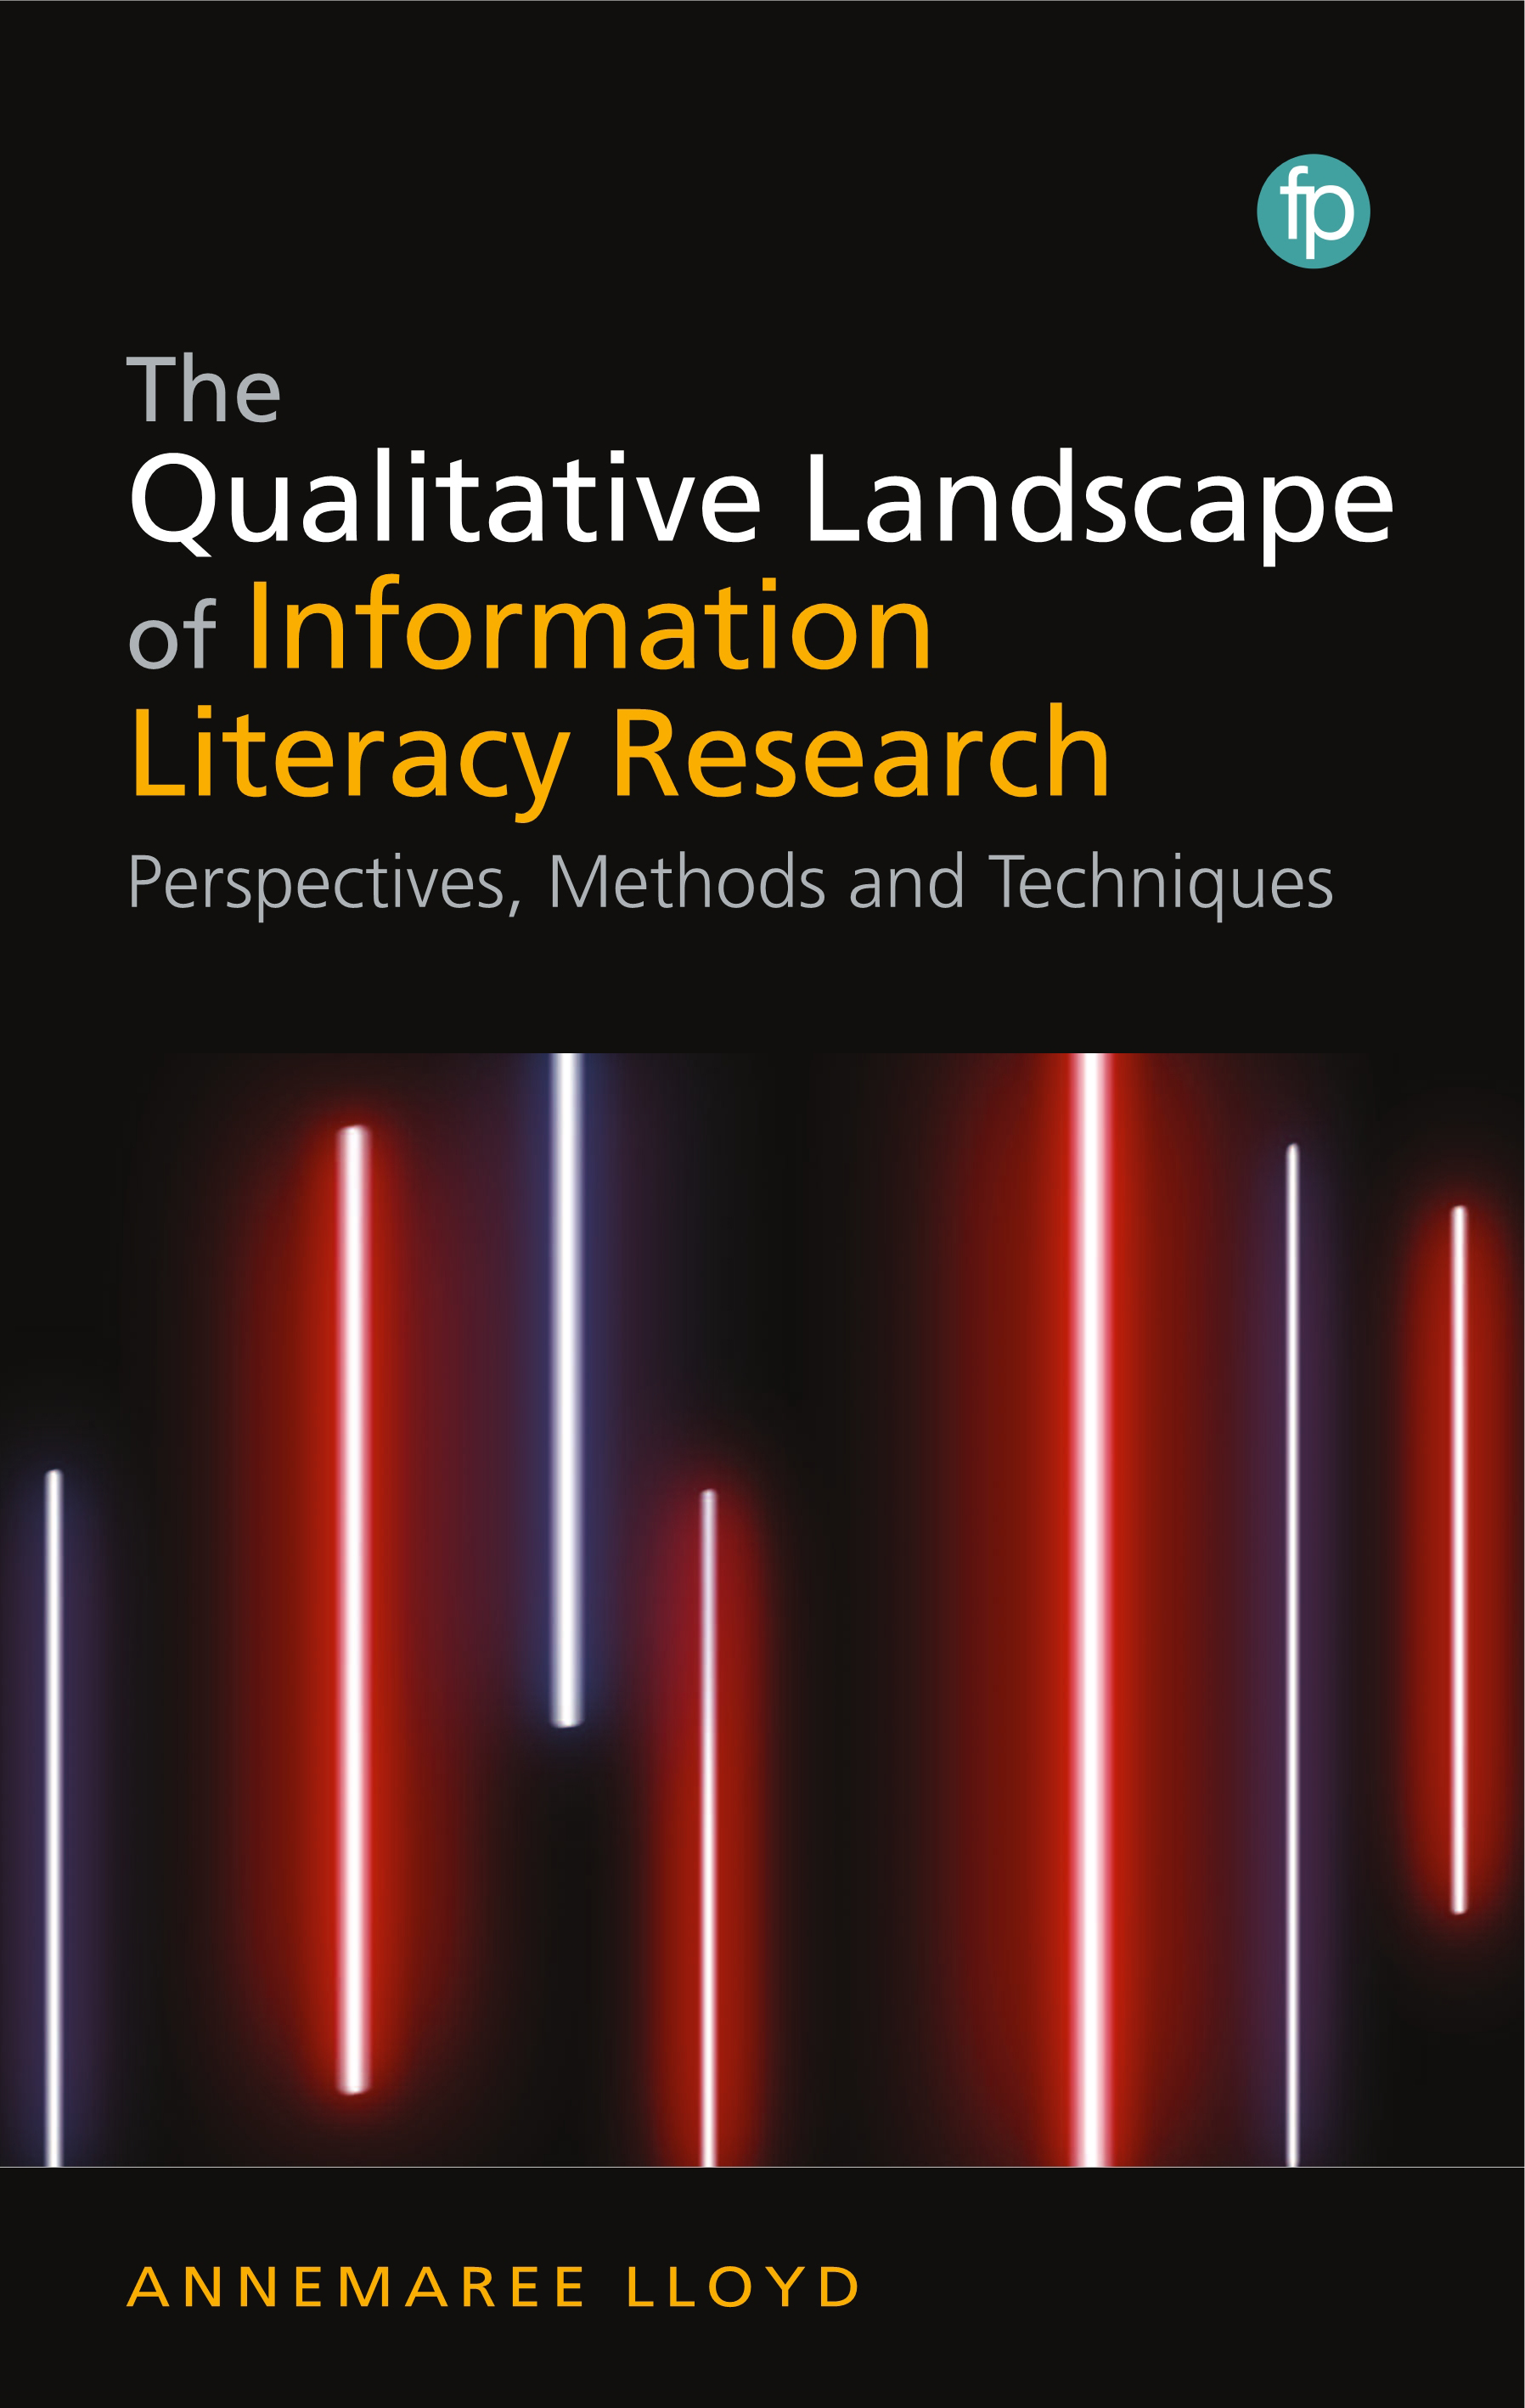 Qualitative Landscape of Information Literacy Research